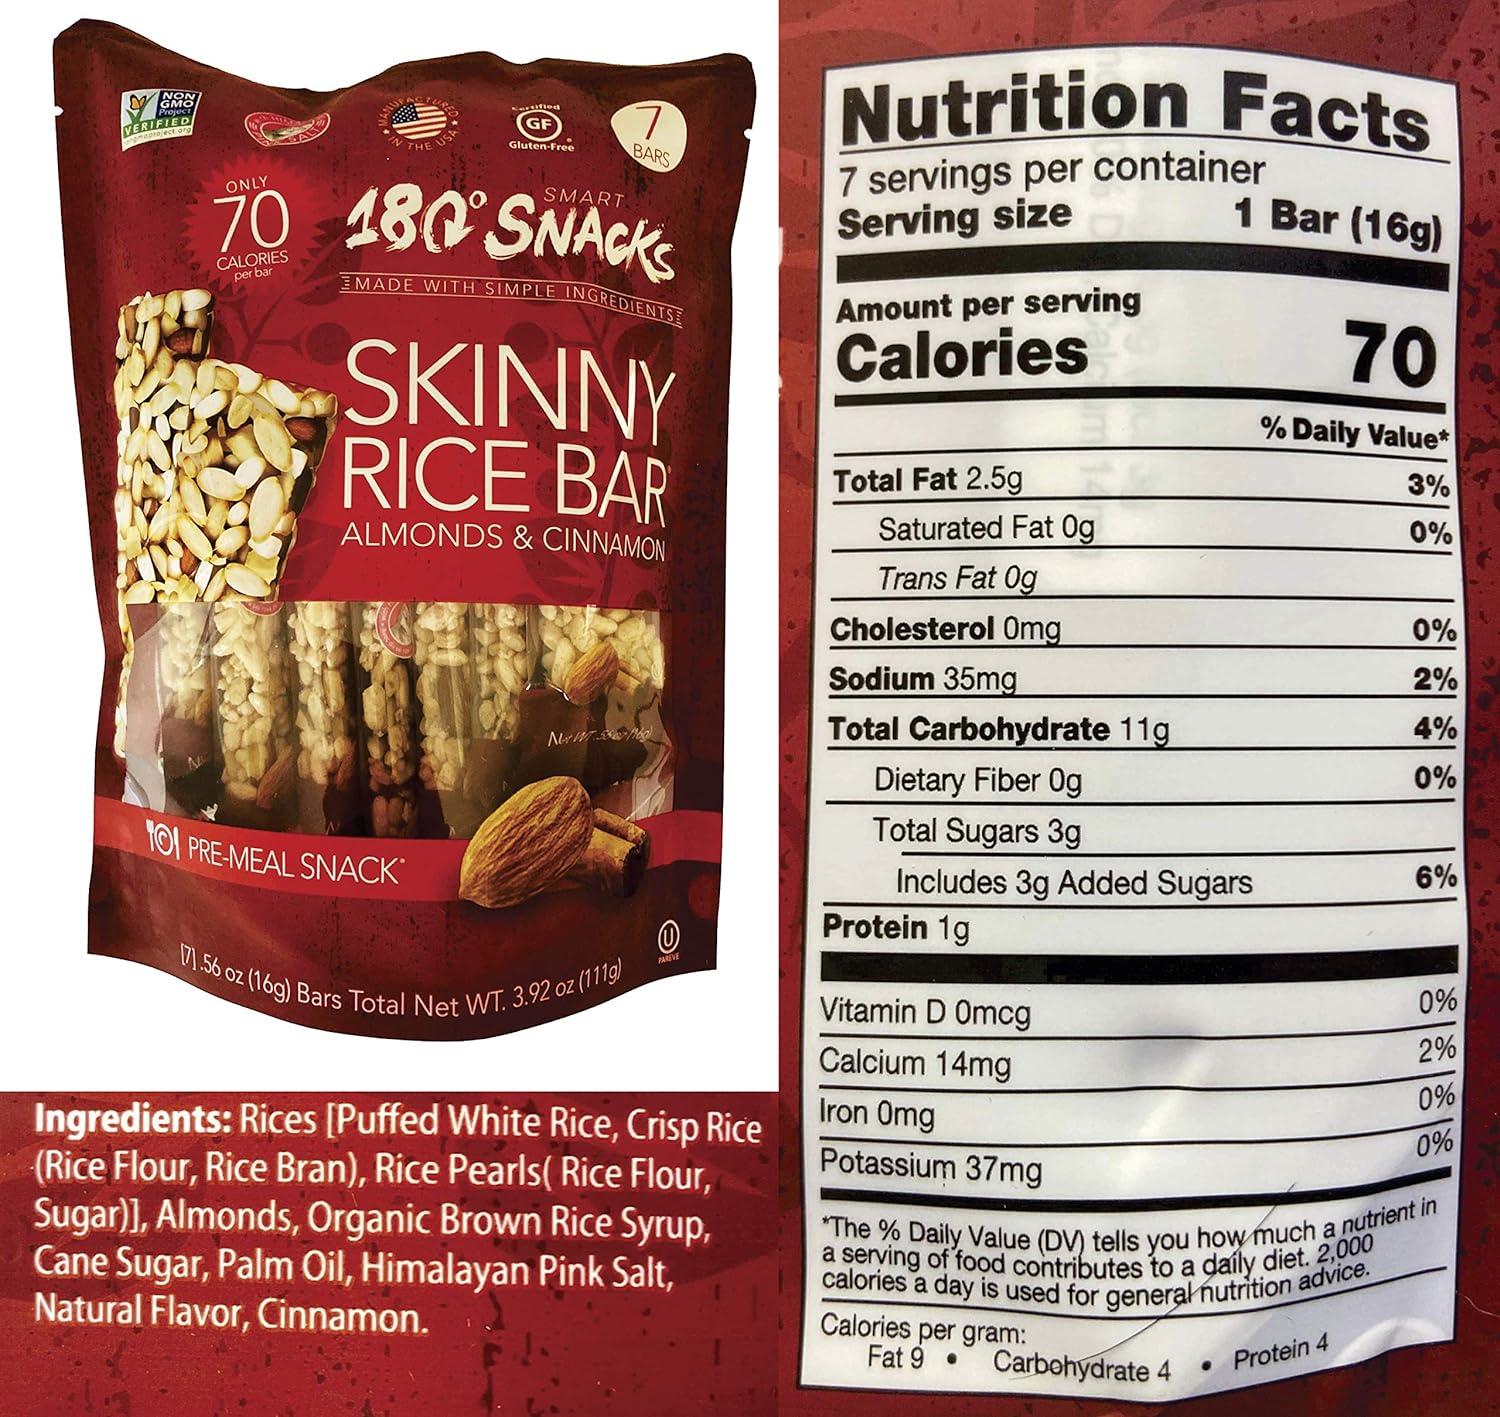 180 Snacks Skinny Rice Bar Variety Pack (Almonds Blueberries & Almond  Cranberries), Only 60 Calories per Bar, Total 40 Bars, Net wt 20 oz (560g)  